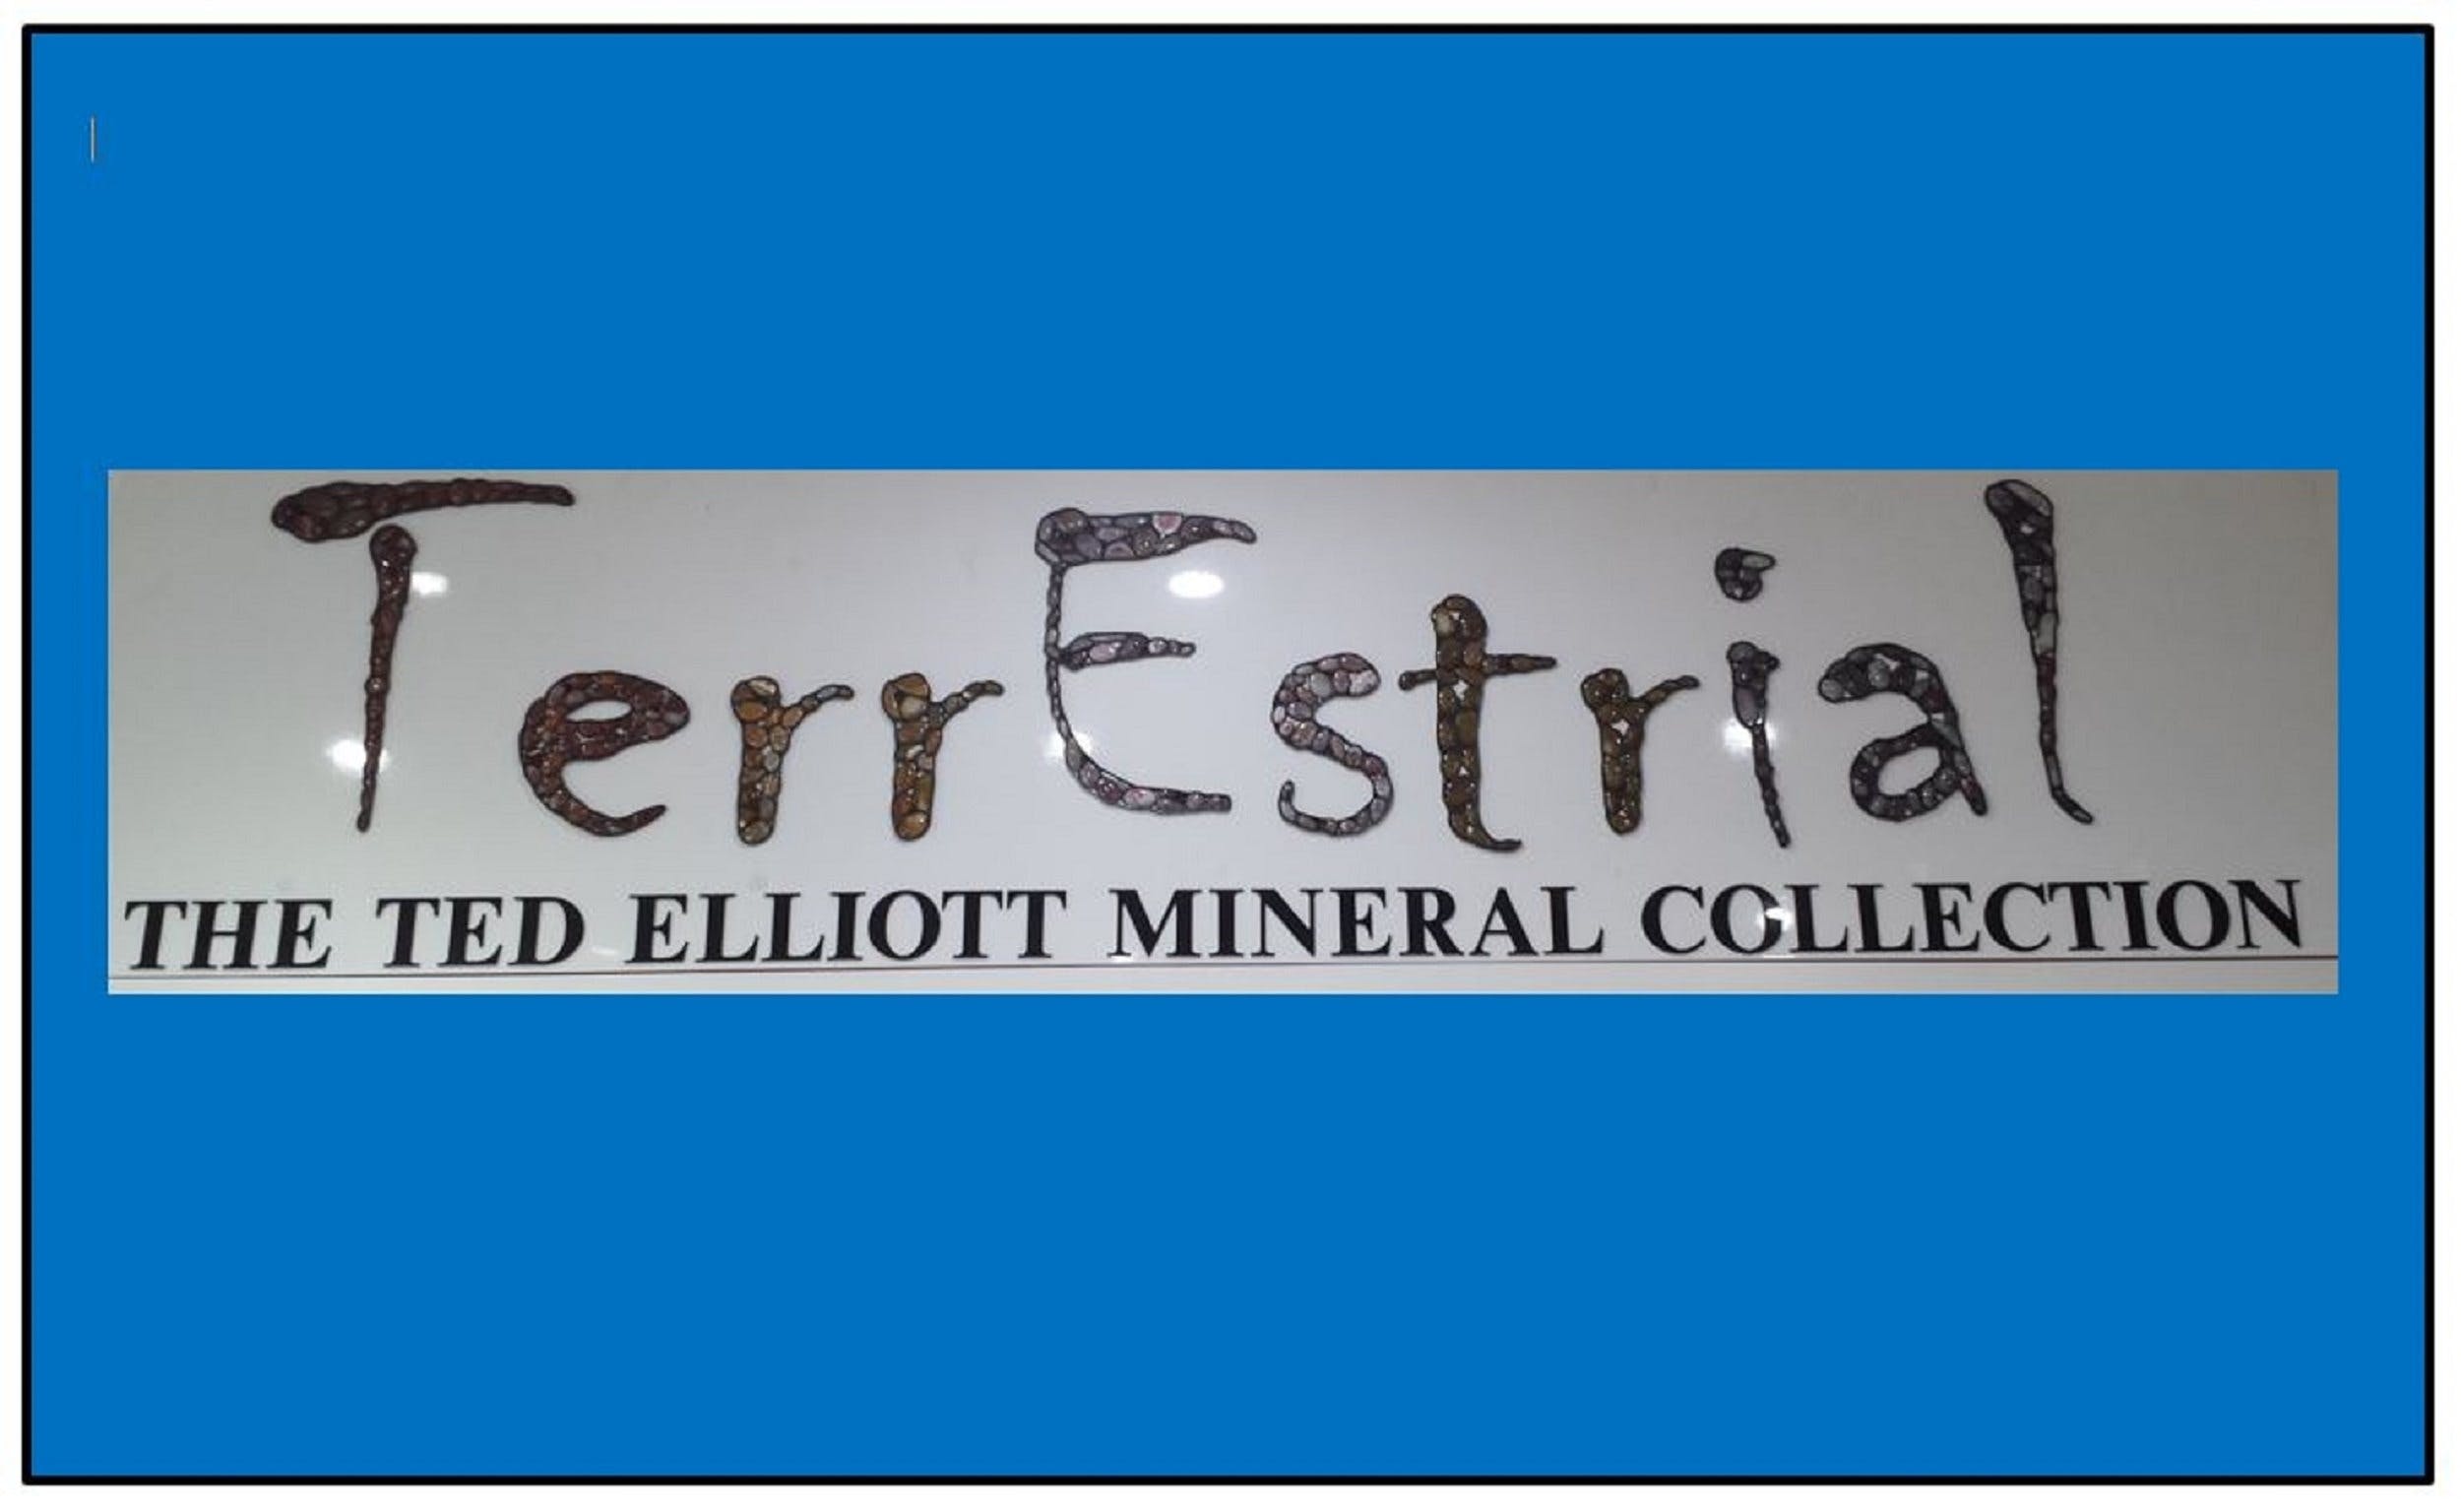 The Ted Elliott Mineral Collection - Attractions Sydney